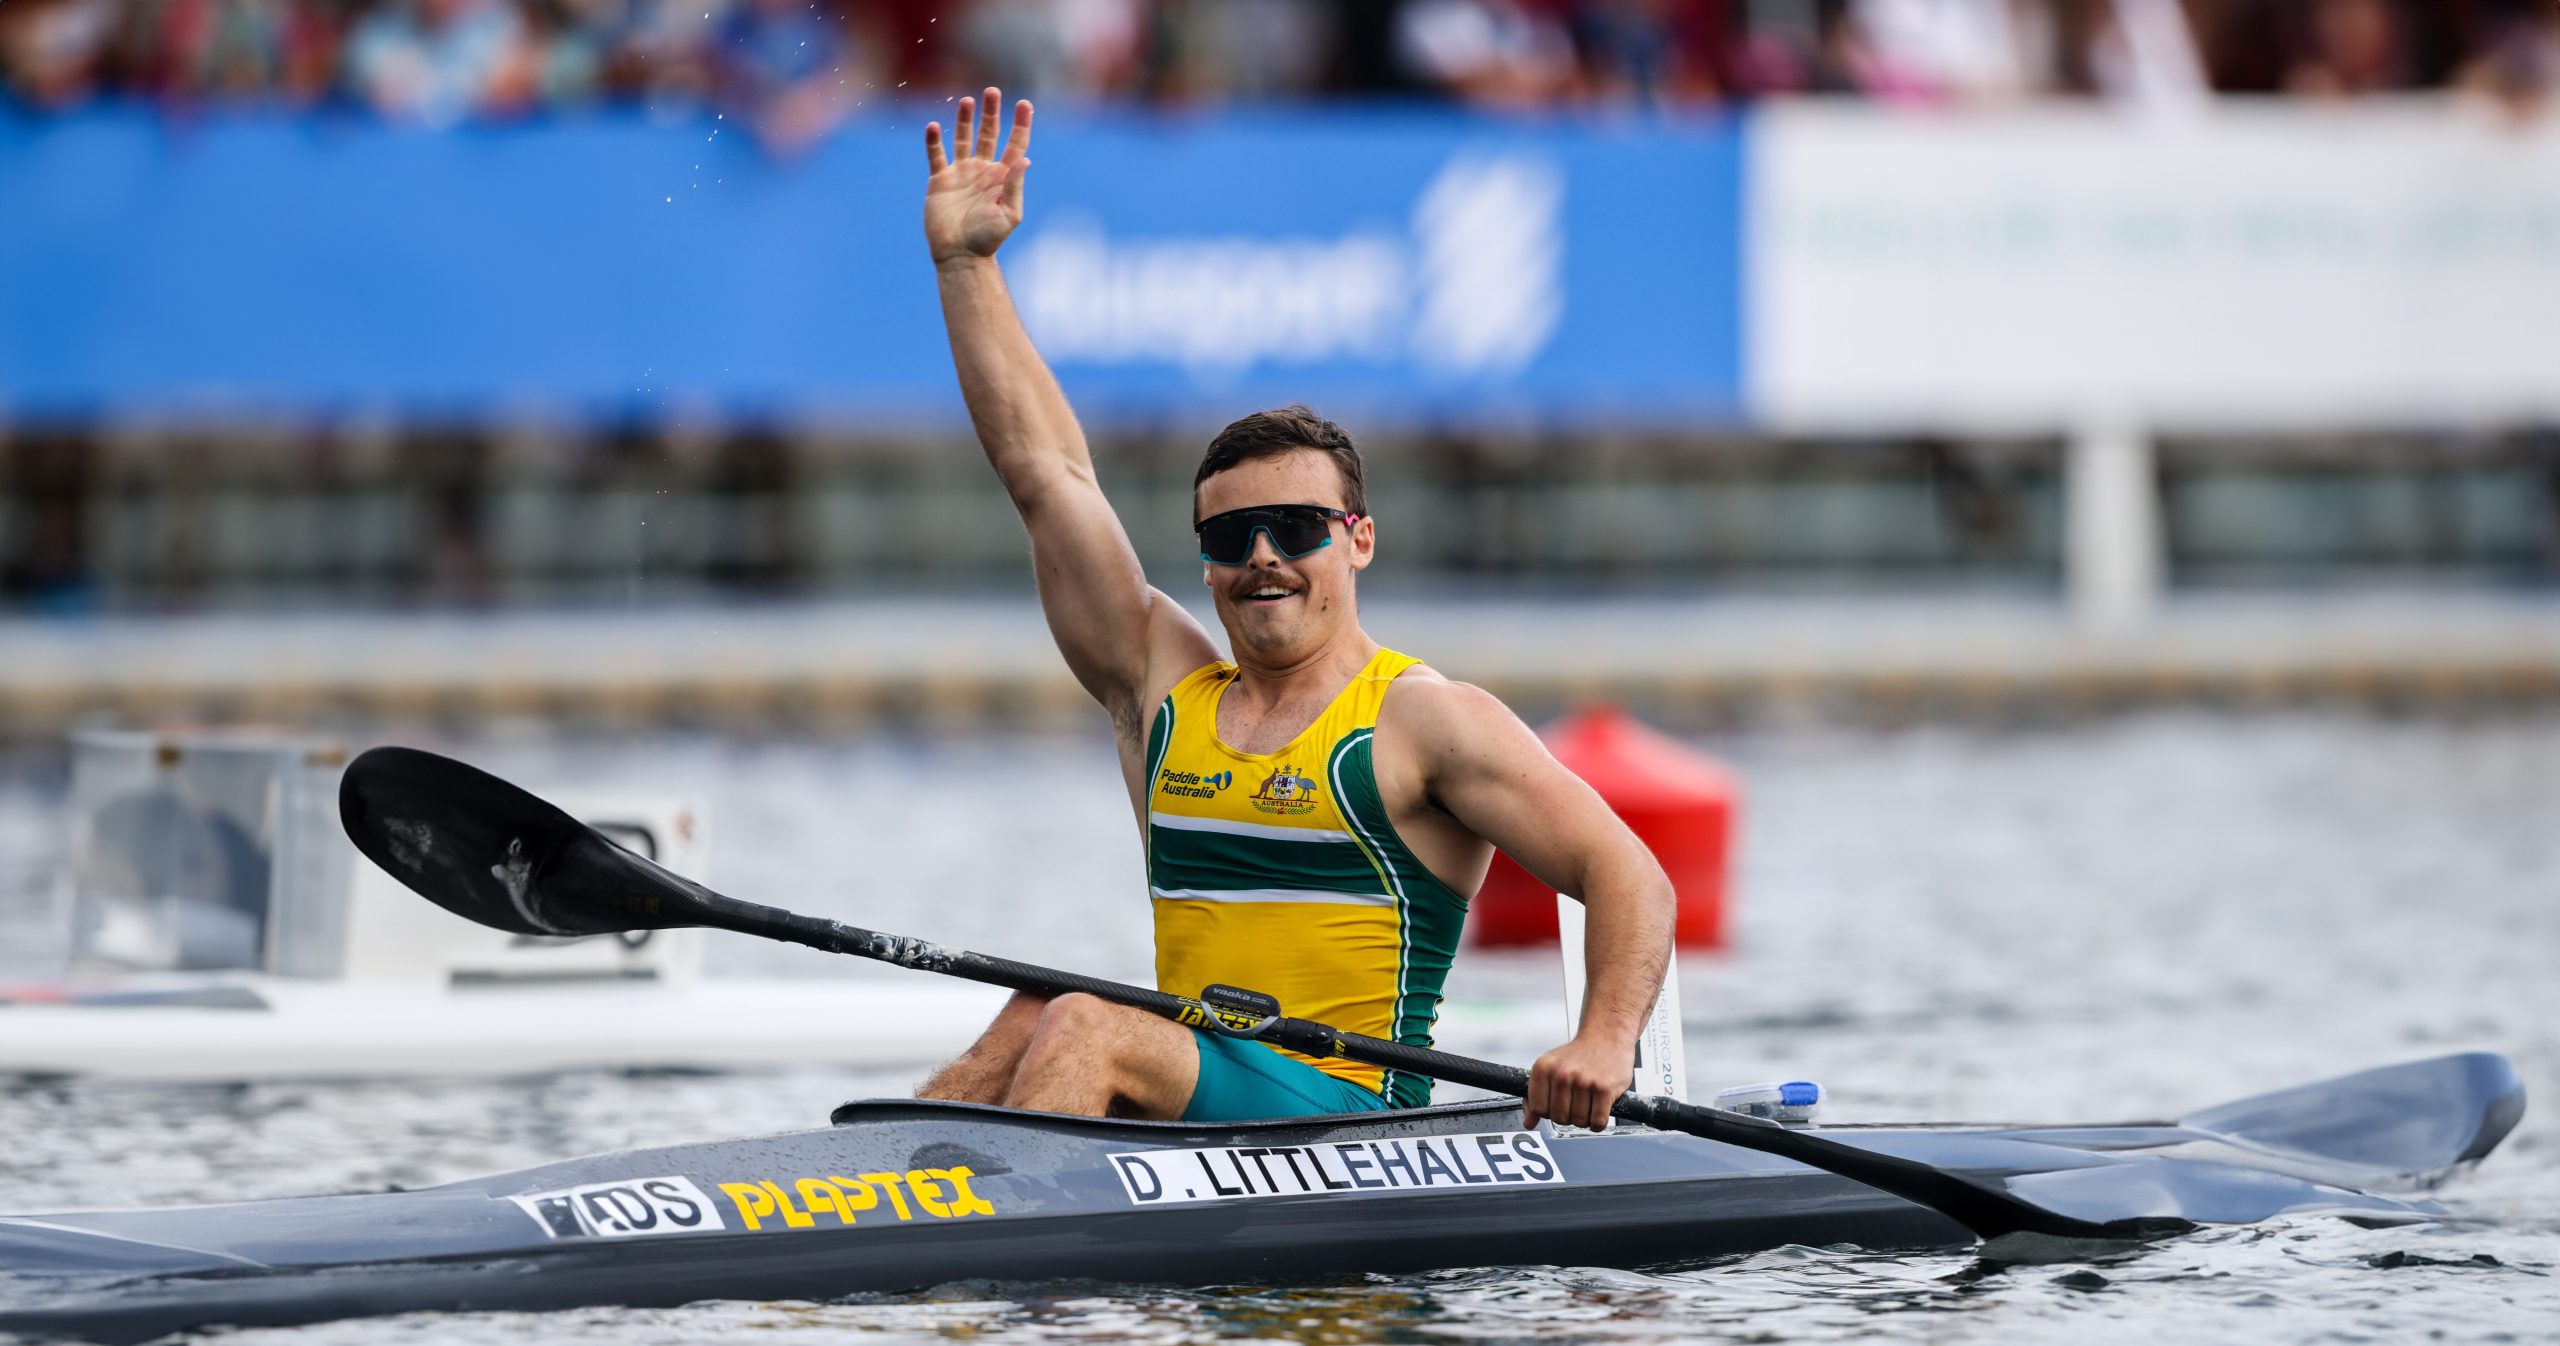 Dylan Littlehales wins world championships gold in the Canoe Sprint. 